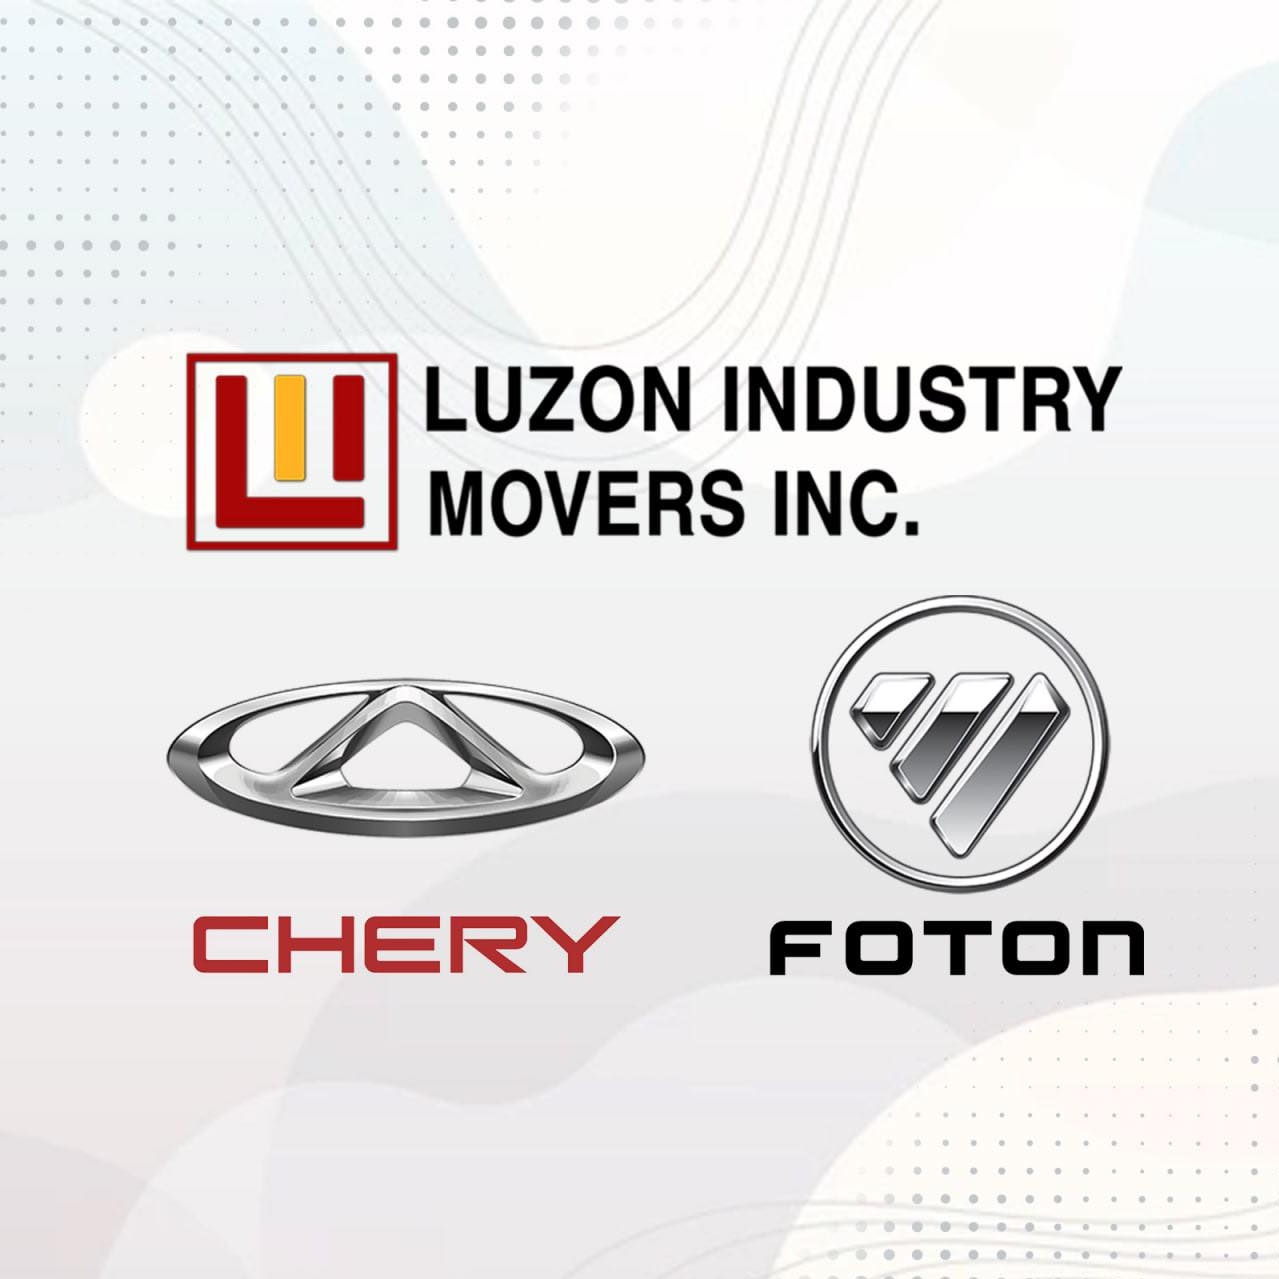 LUZON INDUSTRY MOVERS INC